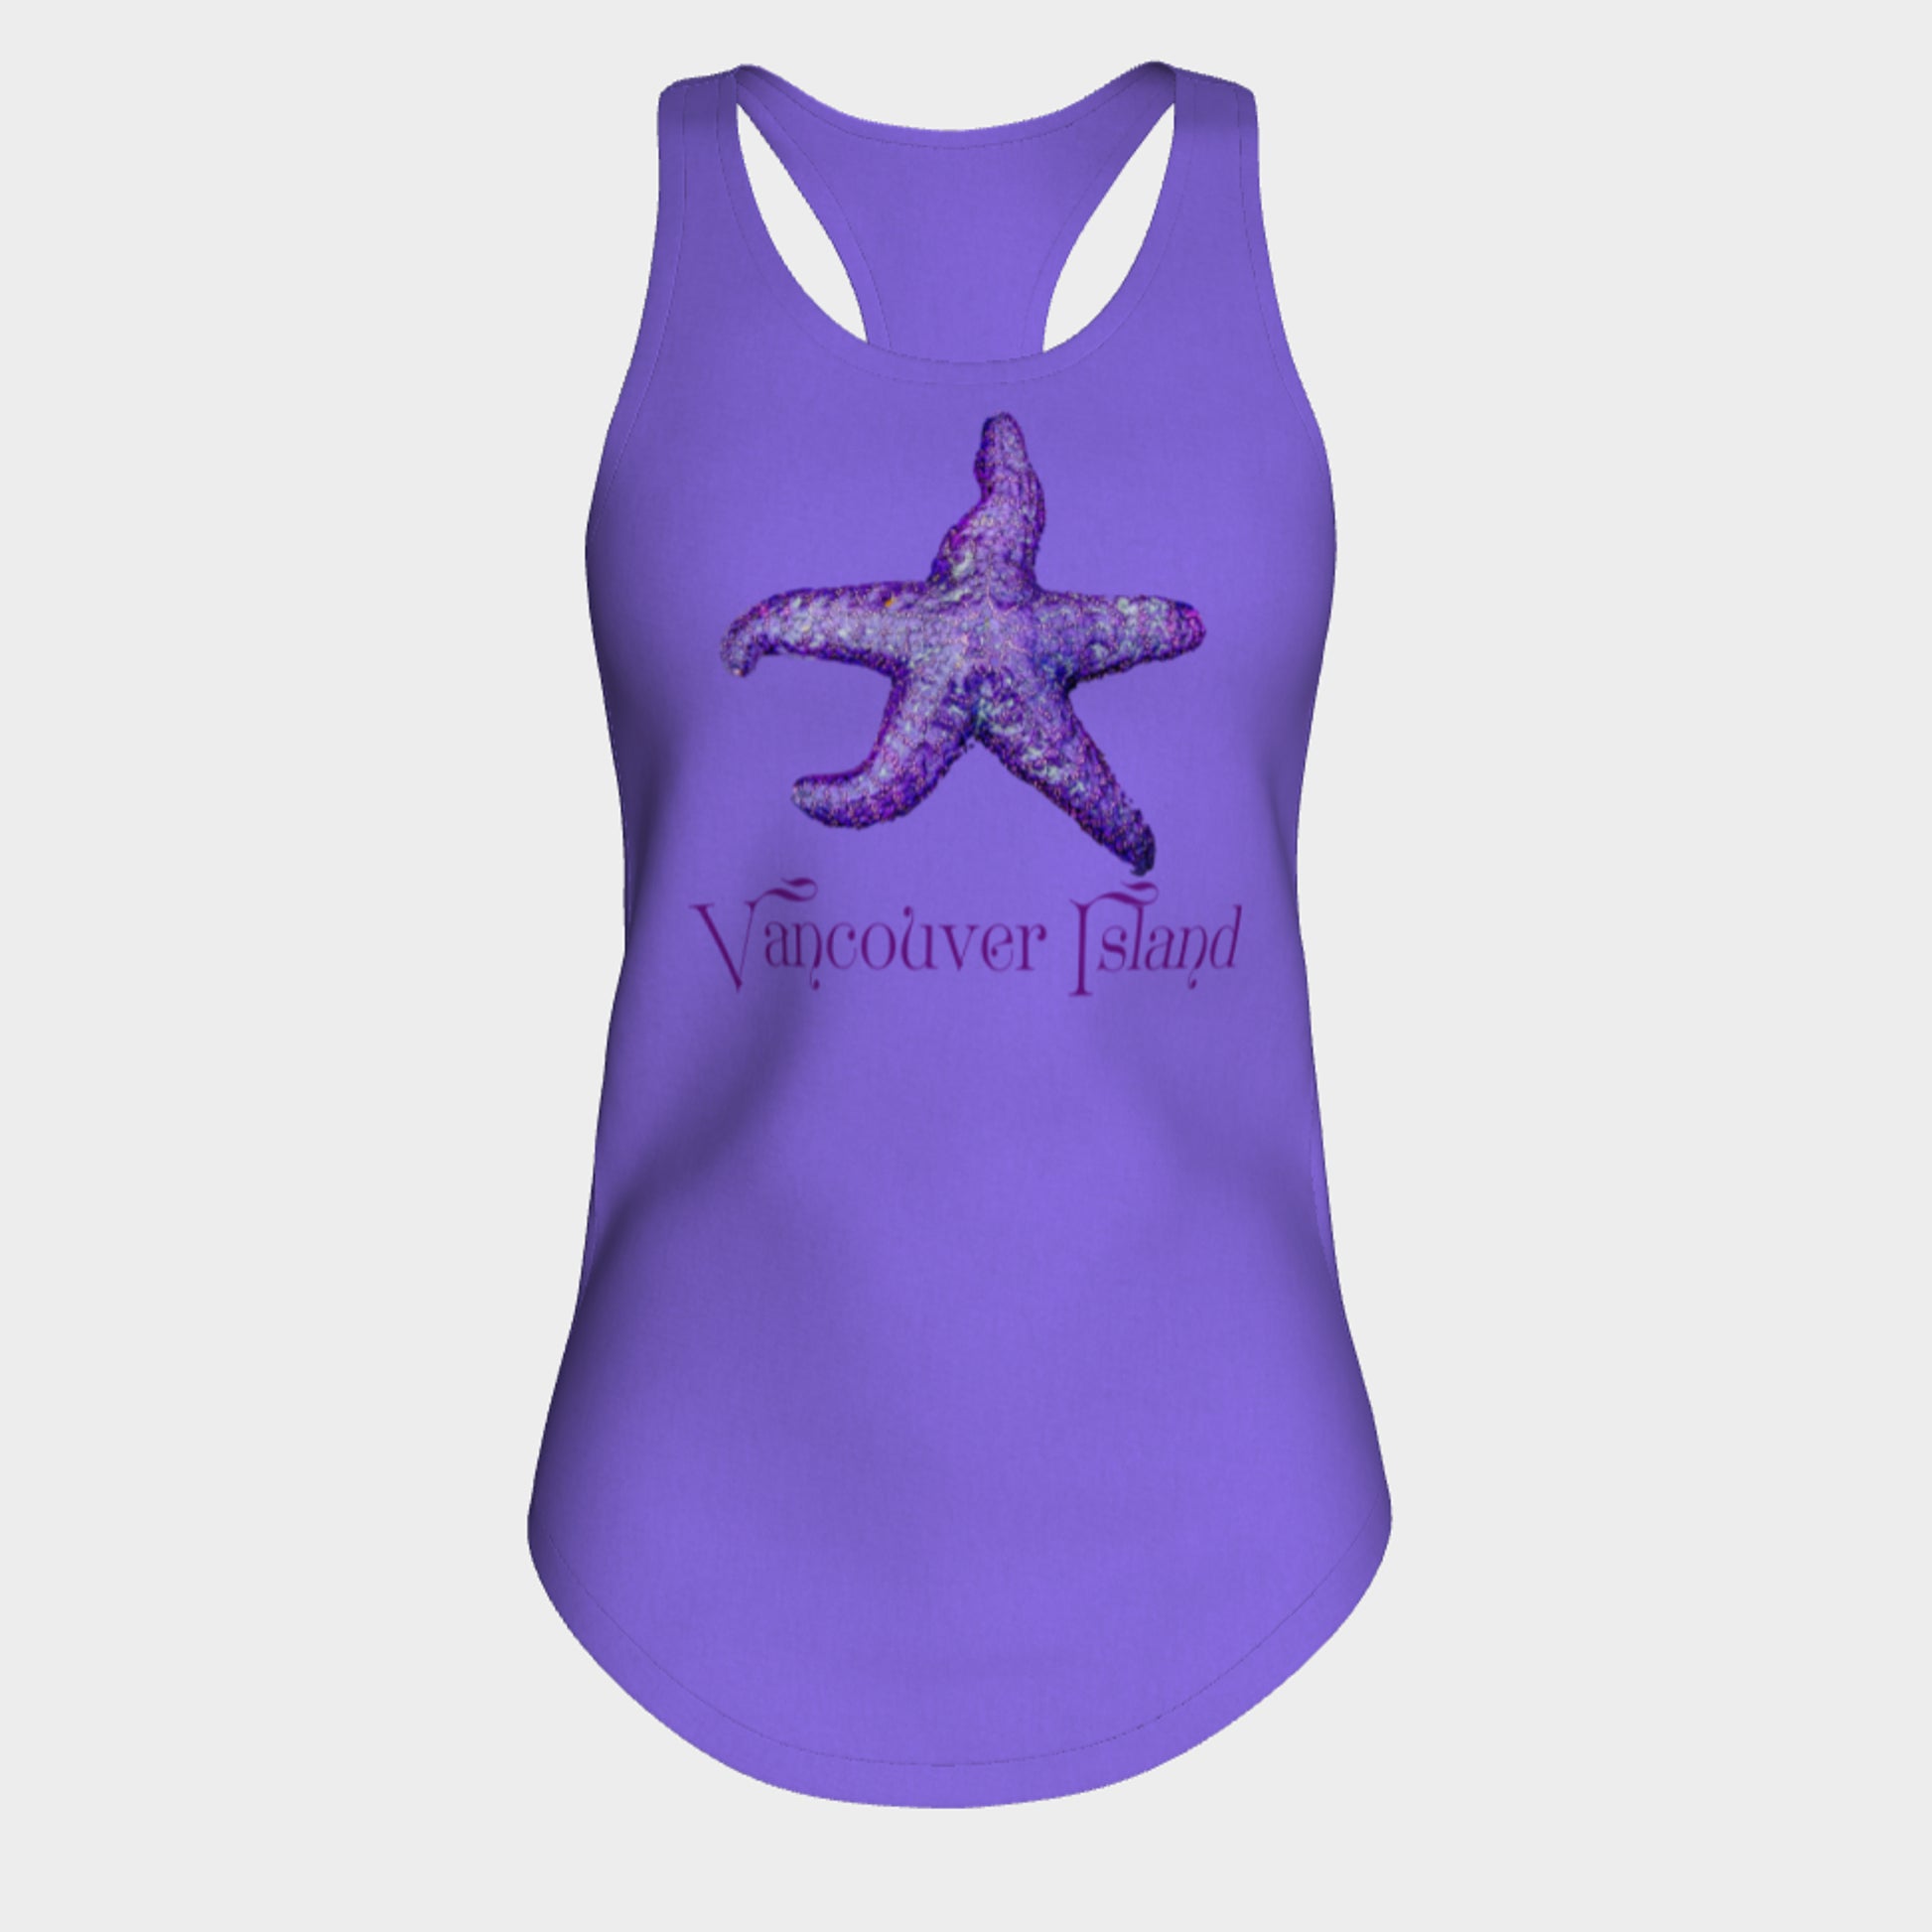 Starfish Vancouver Island Racerback Tank Top  Excellent choice for the summer or for working out.   Made from 60% spun cotton and 40% poly for a mix of comfort and performance, you get it all (including my photography and digital art) with this custom printed racerback tank top.   Van Isle Goddess Next Level racerback tank top will quickly become you go-to tank top because of the super comfy fit!